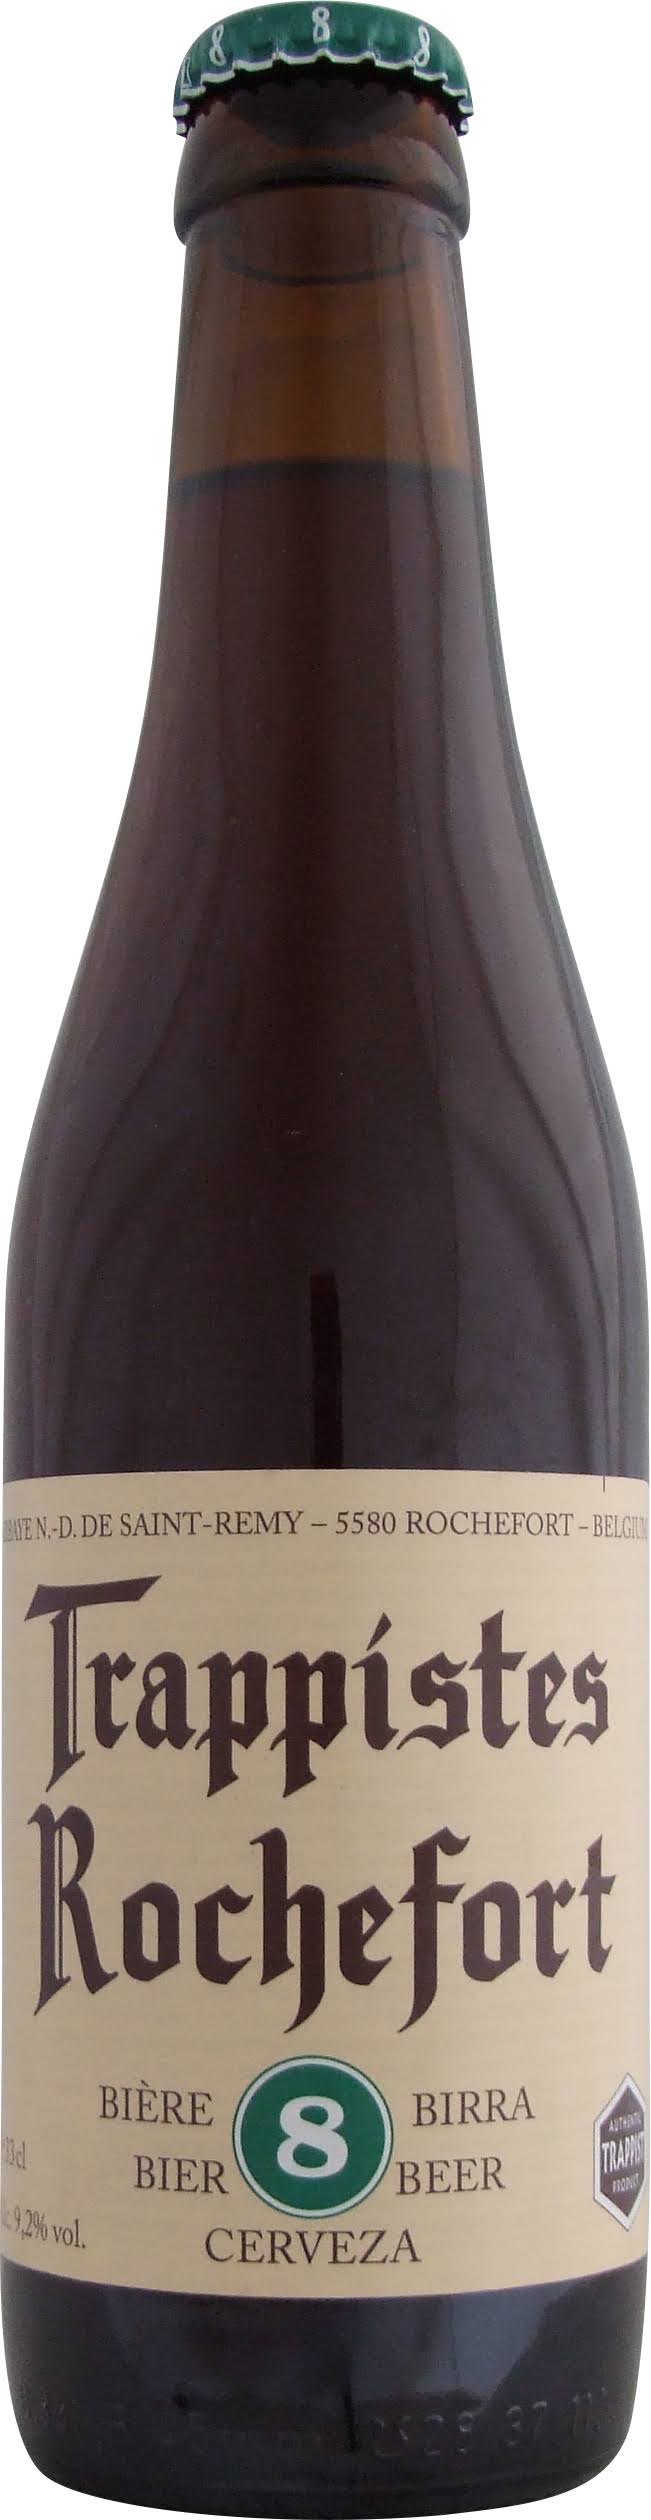 Trappistes Rochefort 8 Beer